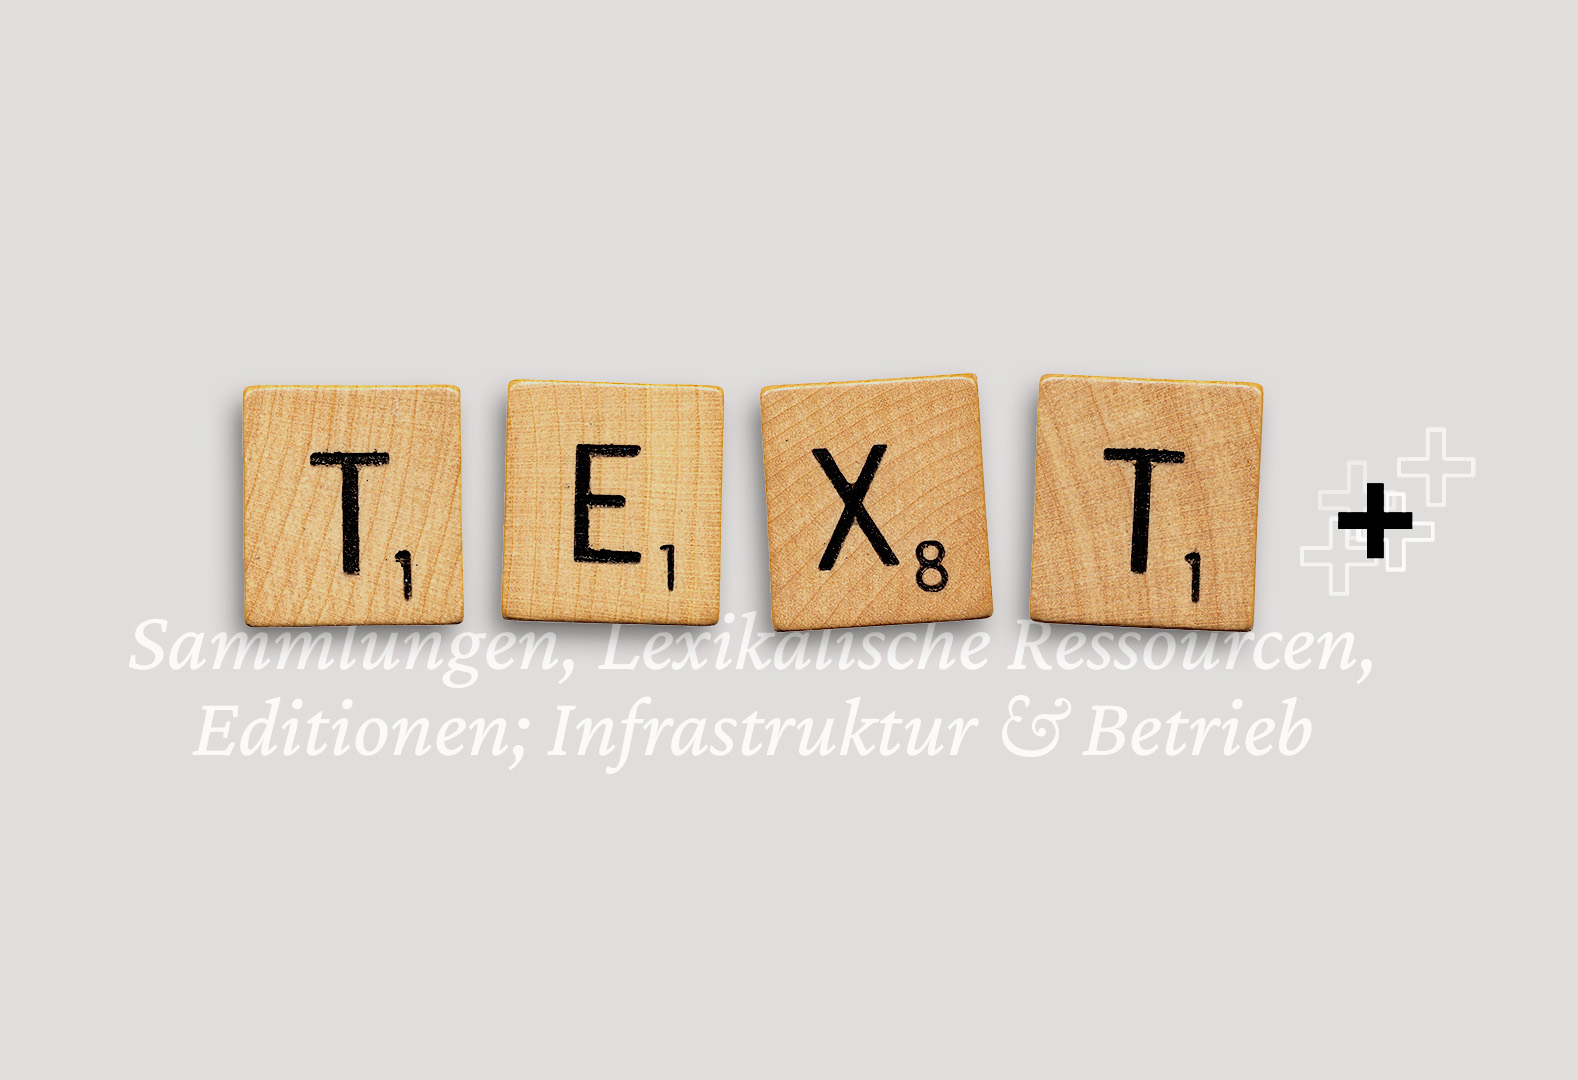 the phrase "Text" laid out in wooden scrabble tiles with an additional "+" sign; light grey background, white keywords about the consortium underneath and beneath the tiles ("collections, lexical resources, editions; infrastructure & operation")